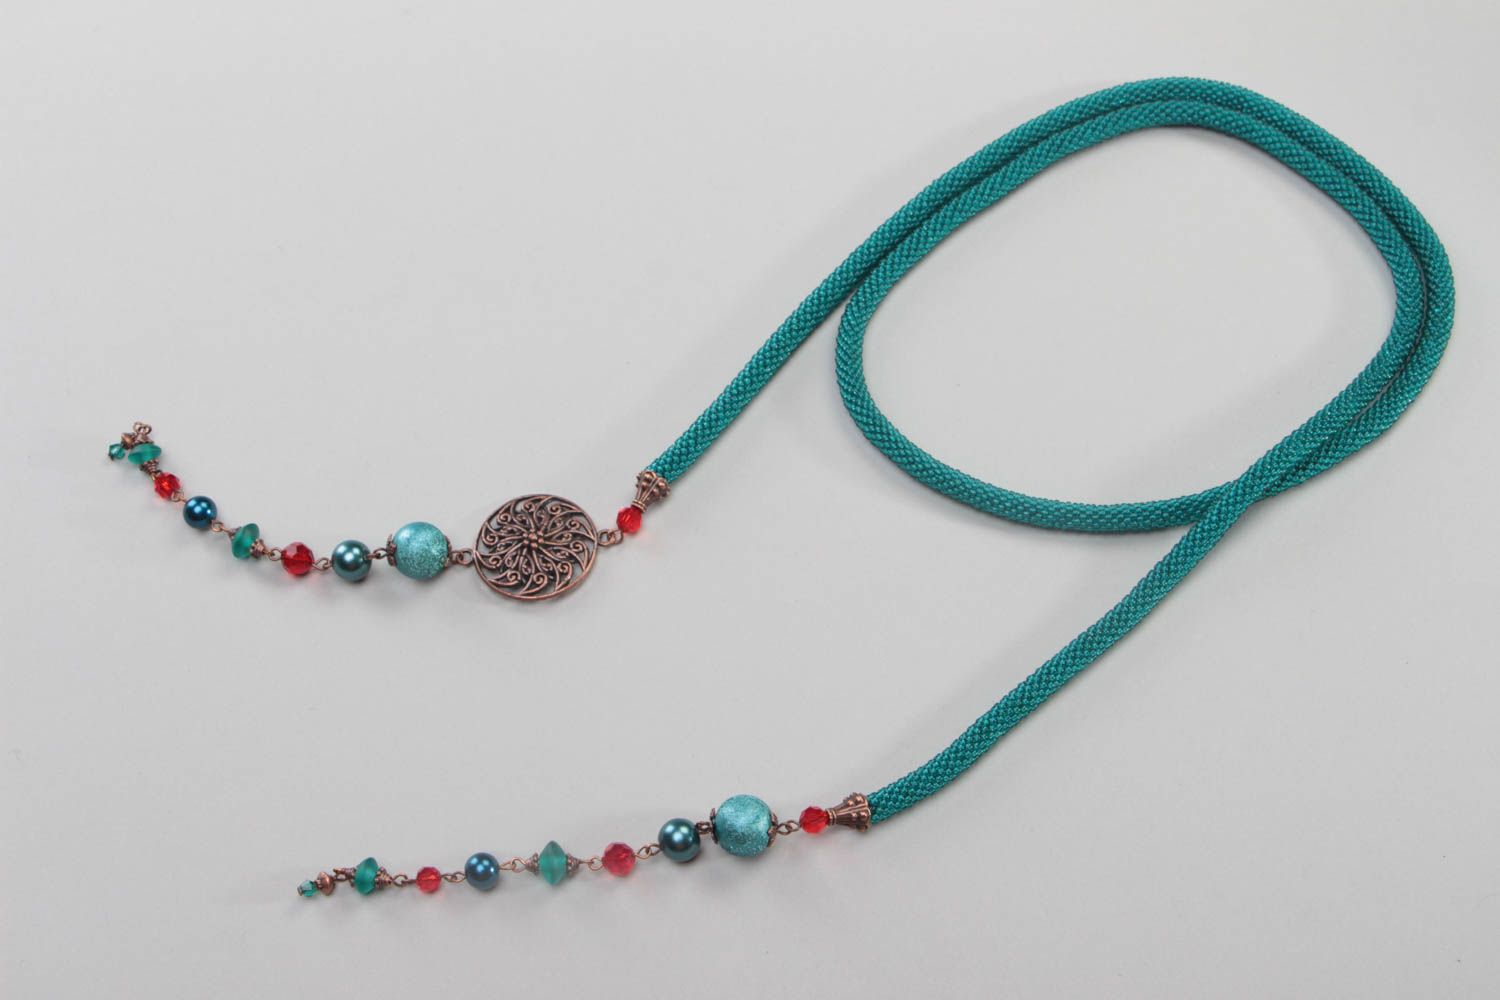 Handmade beaded cord necklace accessory with ceramic pearls designer jewelry photo 2